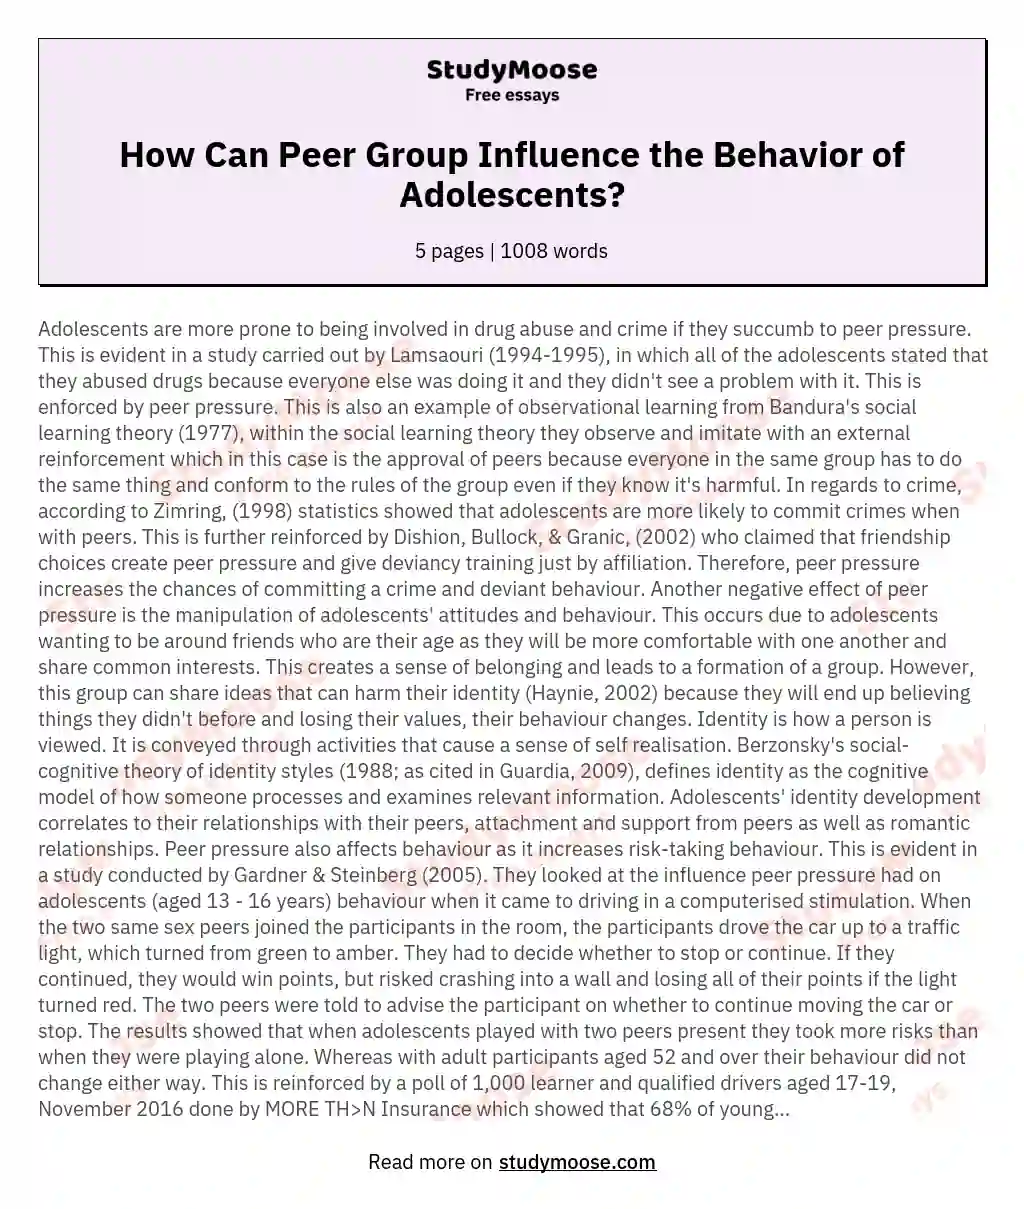 write an expository essay on peer group influence